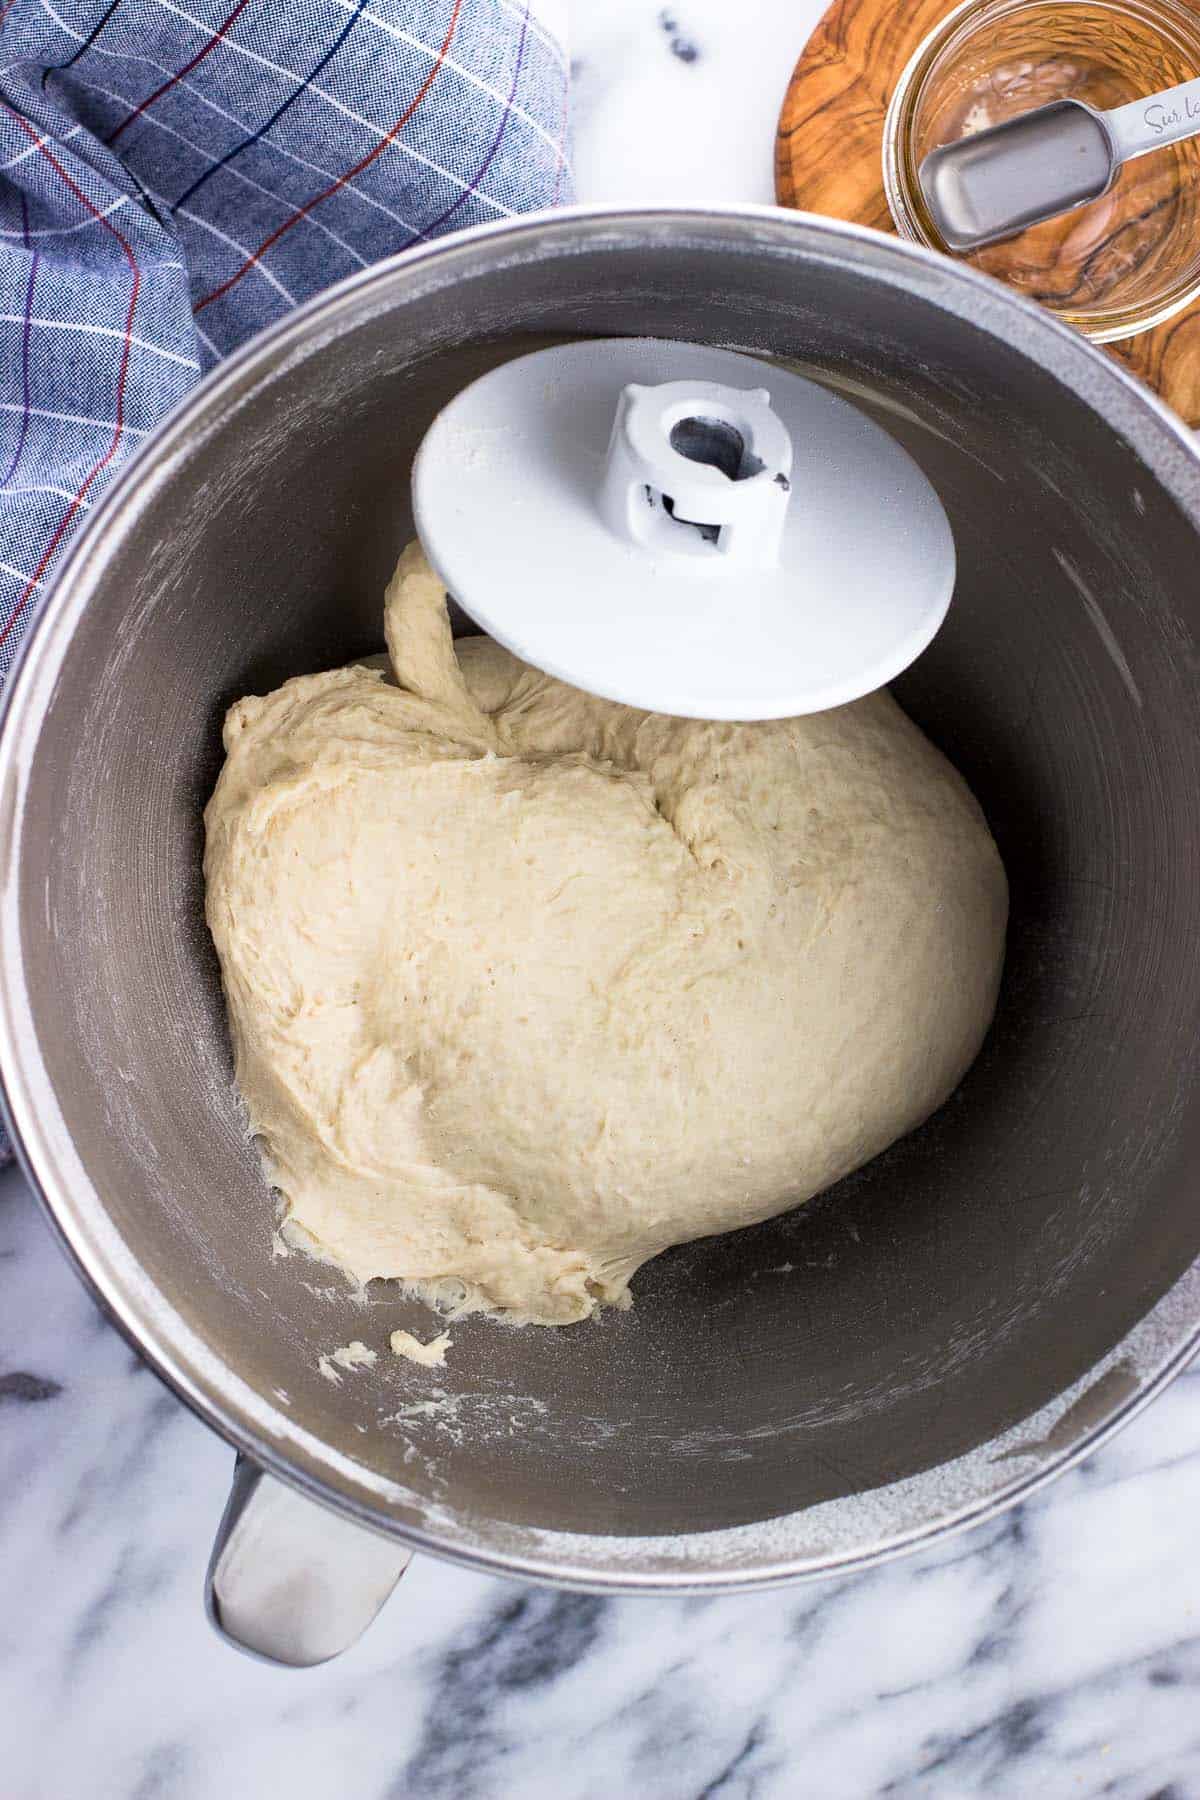 Pizza dough in a metal stand mixer bowl with the dough hook.